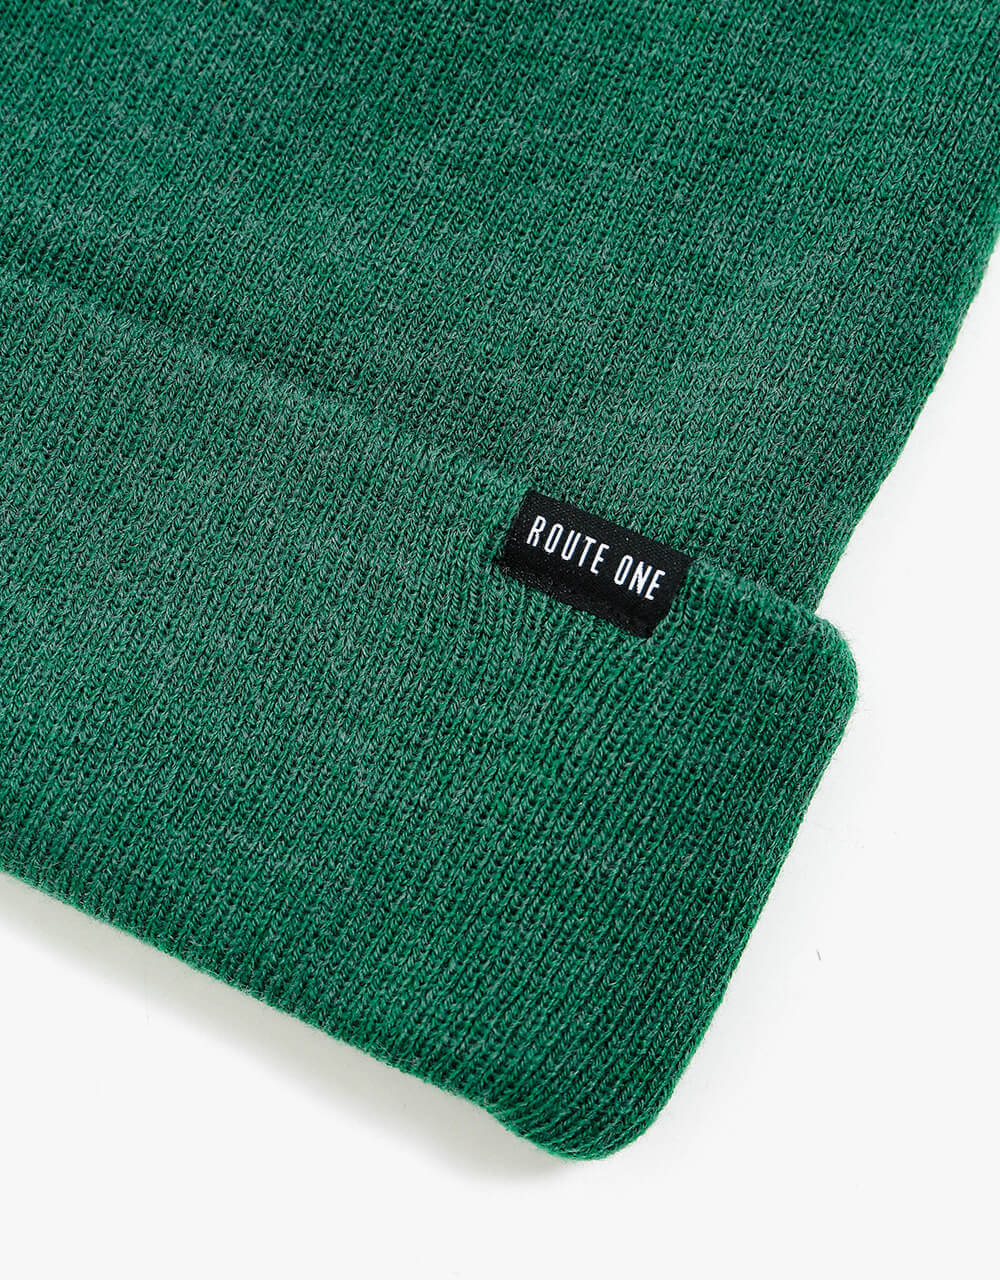 Route One Recycled NY Cuff Beanie - Forest Green